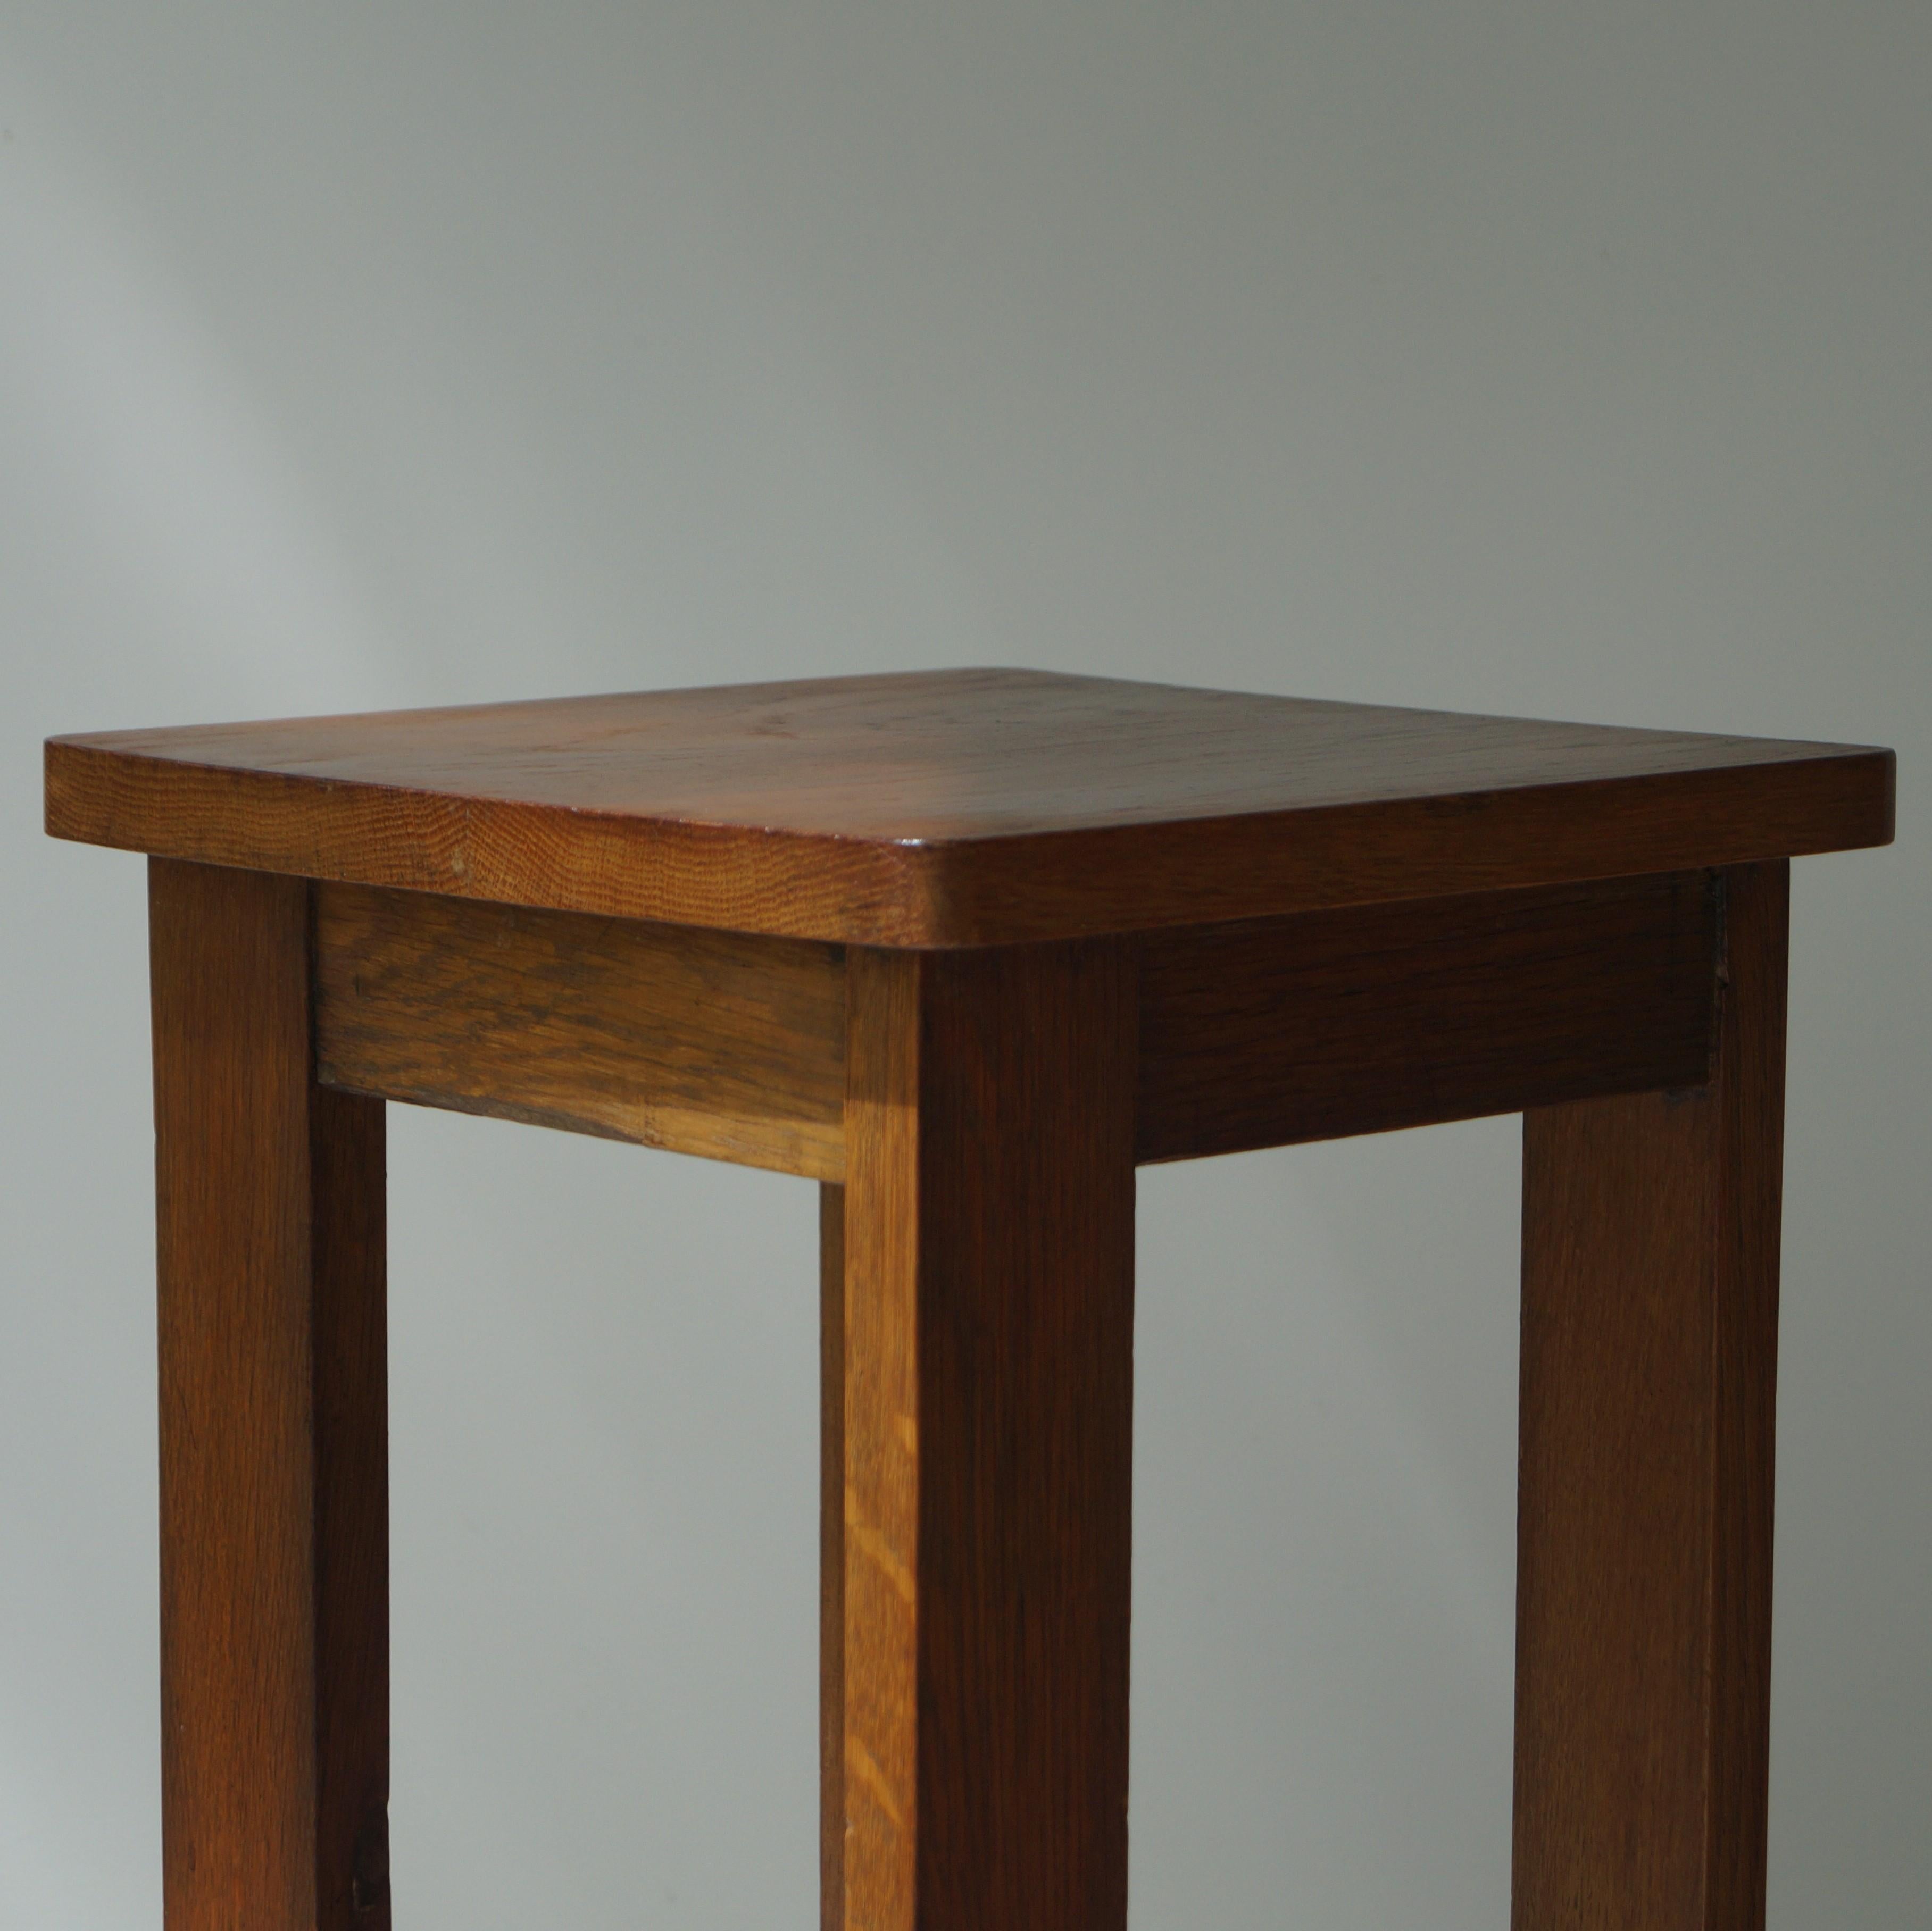 Dutch Art Deco Haagse School side table attributed to Jan Brunott, 1920s 1